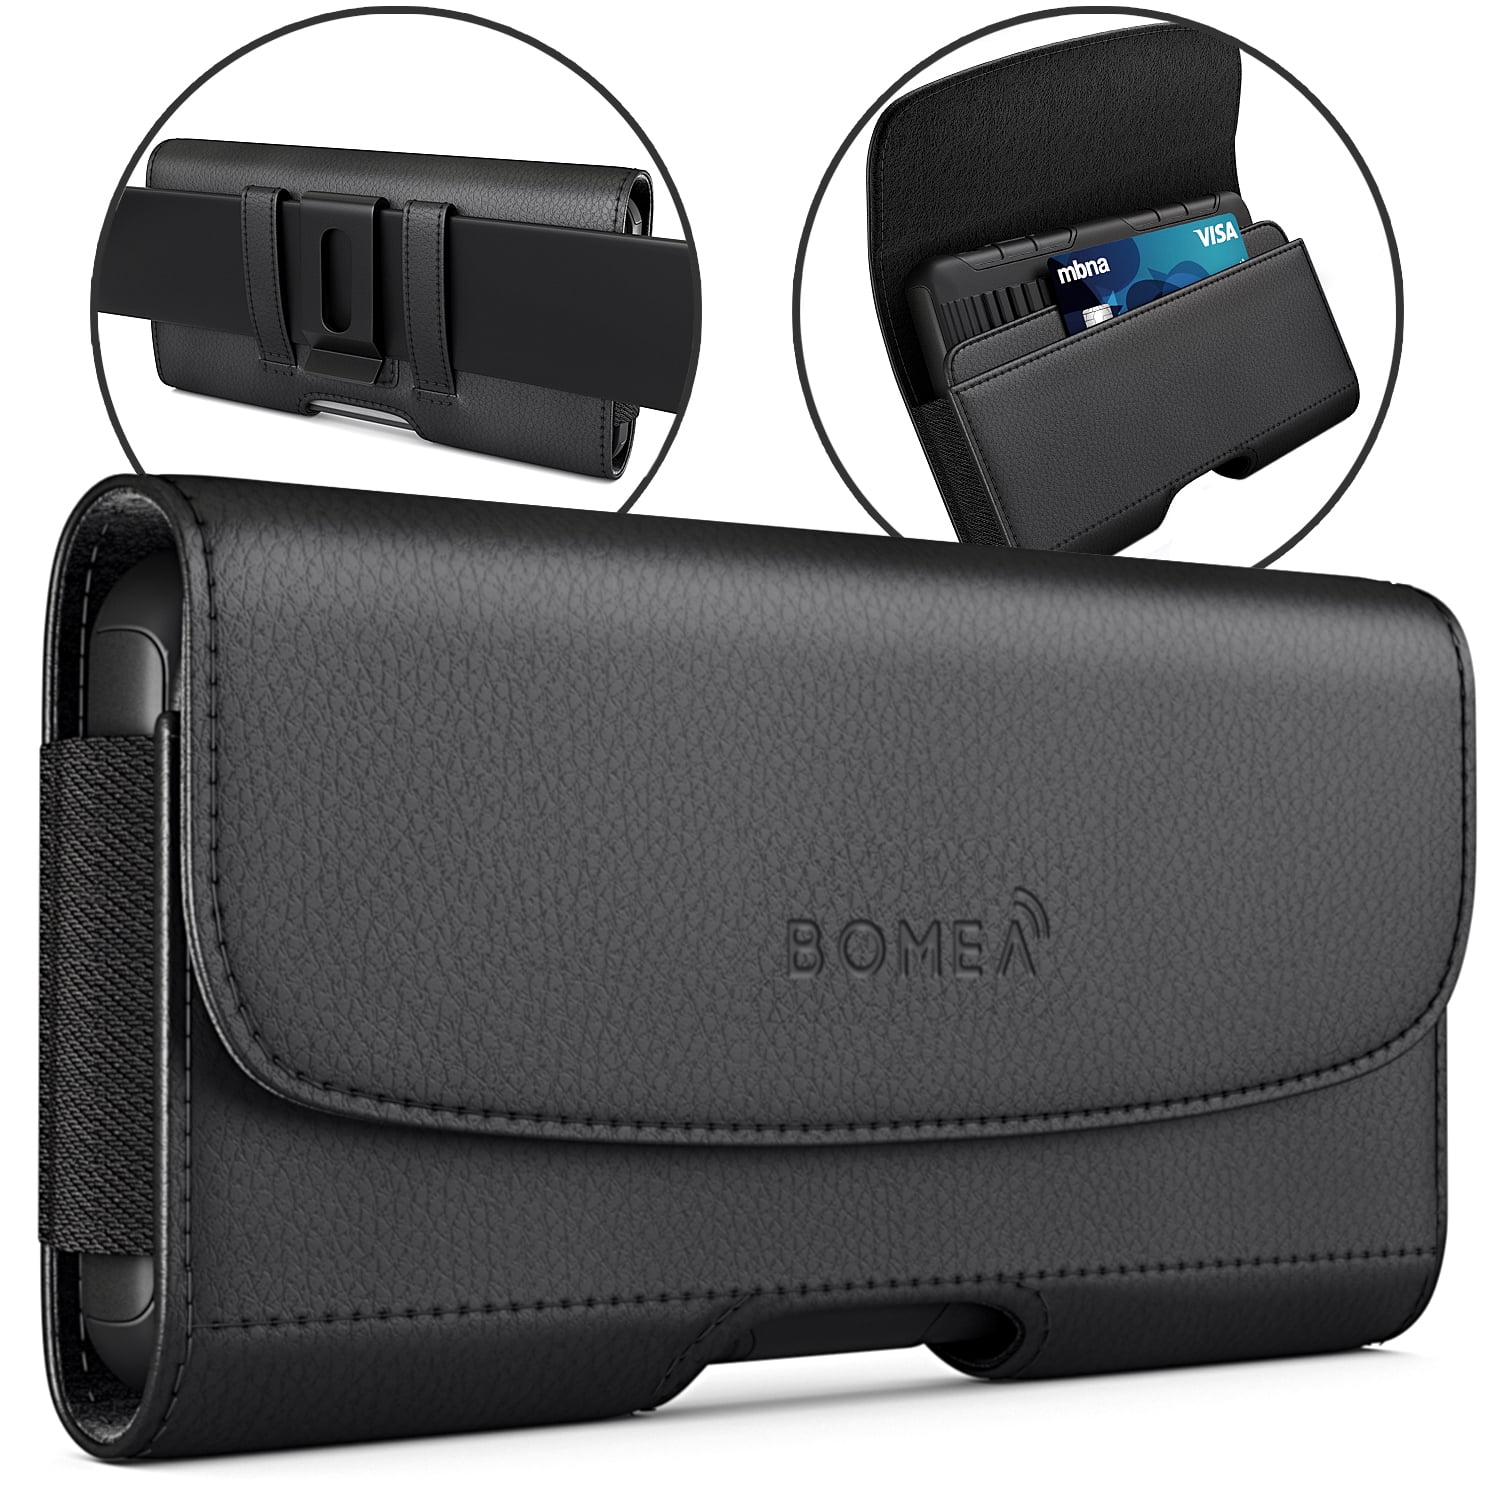 Nylon Cell Phone Belt Clip Holster with RFID Blocking Card Slot Compatible for iPhone 11 Pro Max XR 8 7 Plus Galaxy Note 10 A10s A20 A51 Moto G Stylus 2020 G7 Plus Pixel 4a TCL 10 Pro OnePlus 6T L